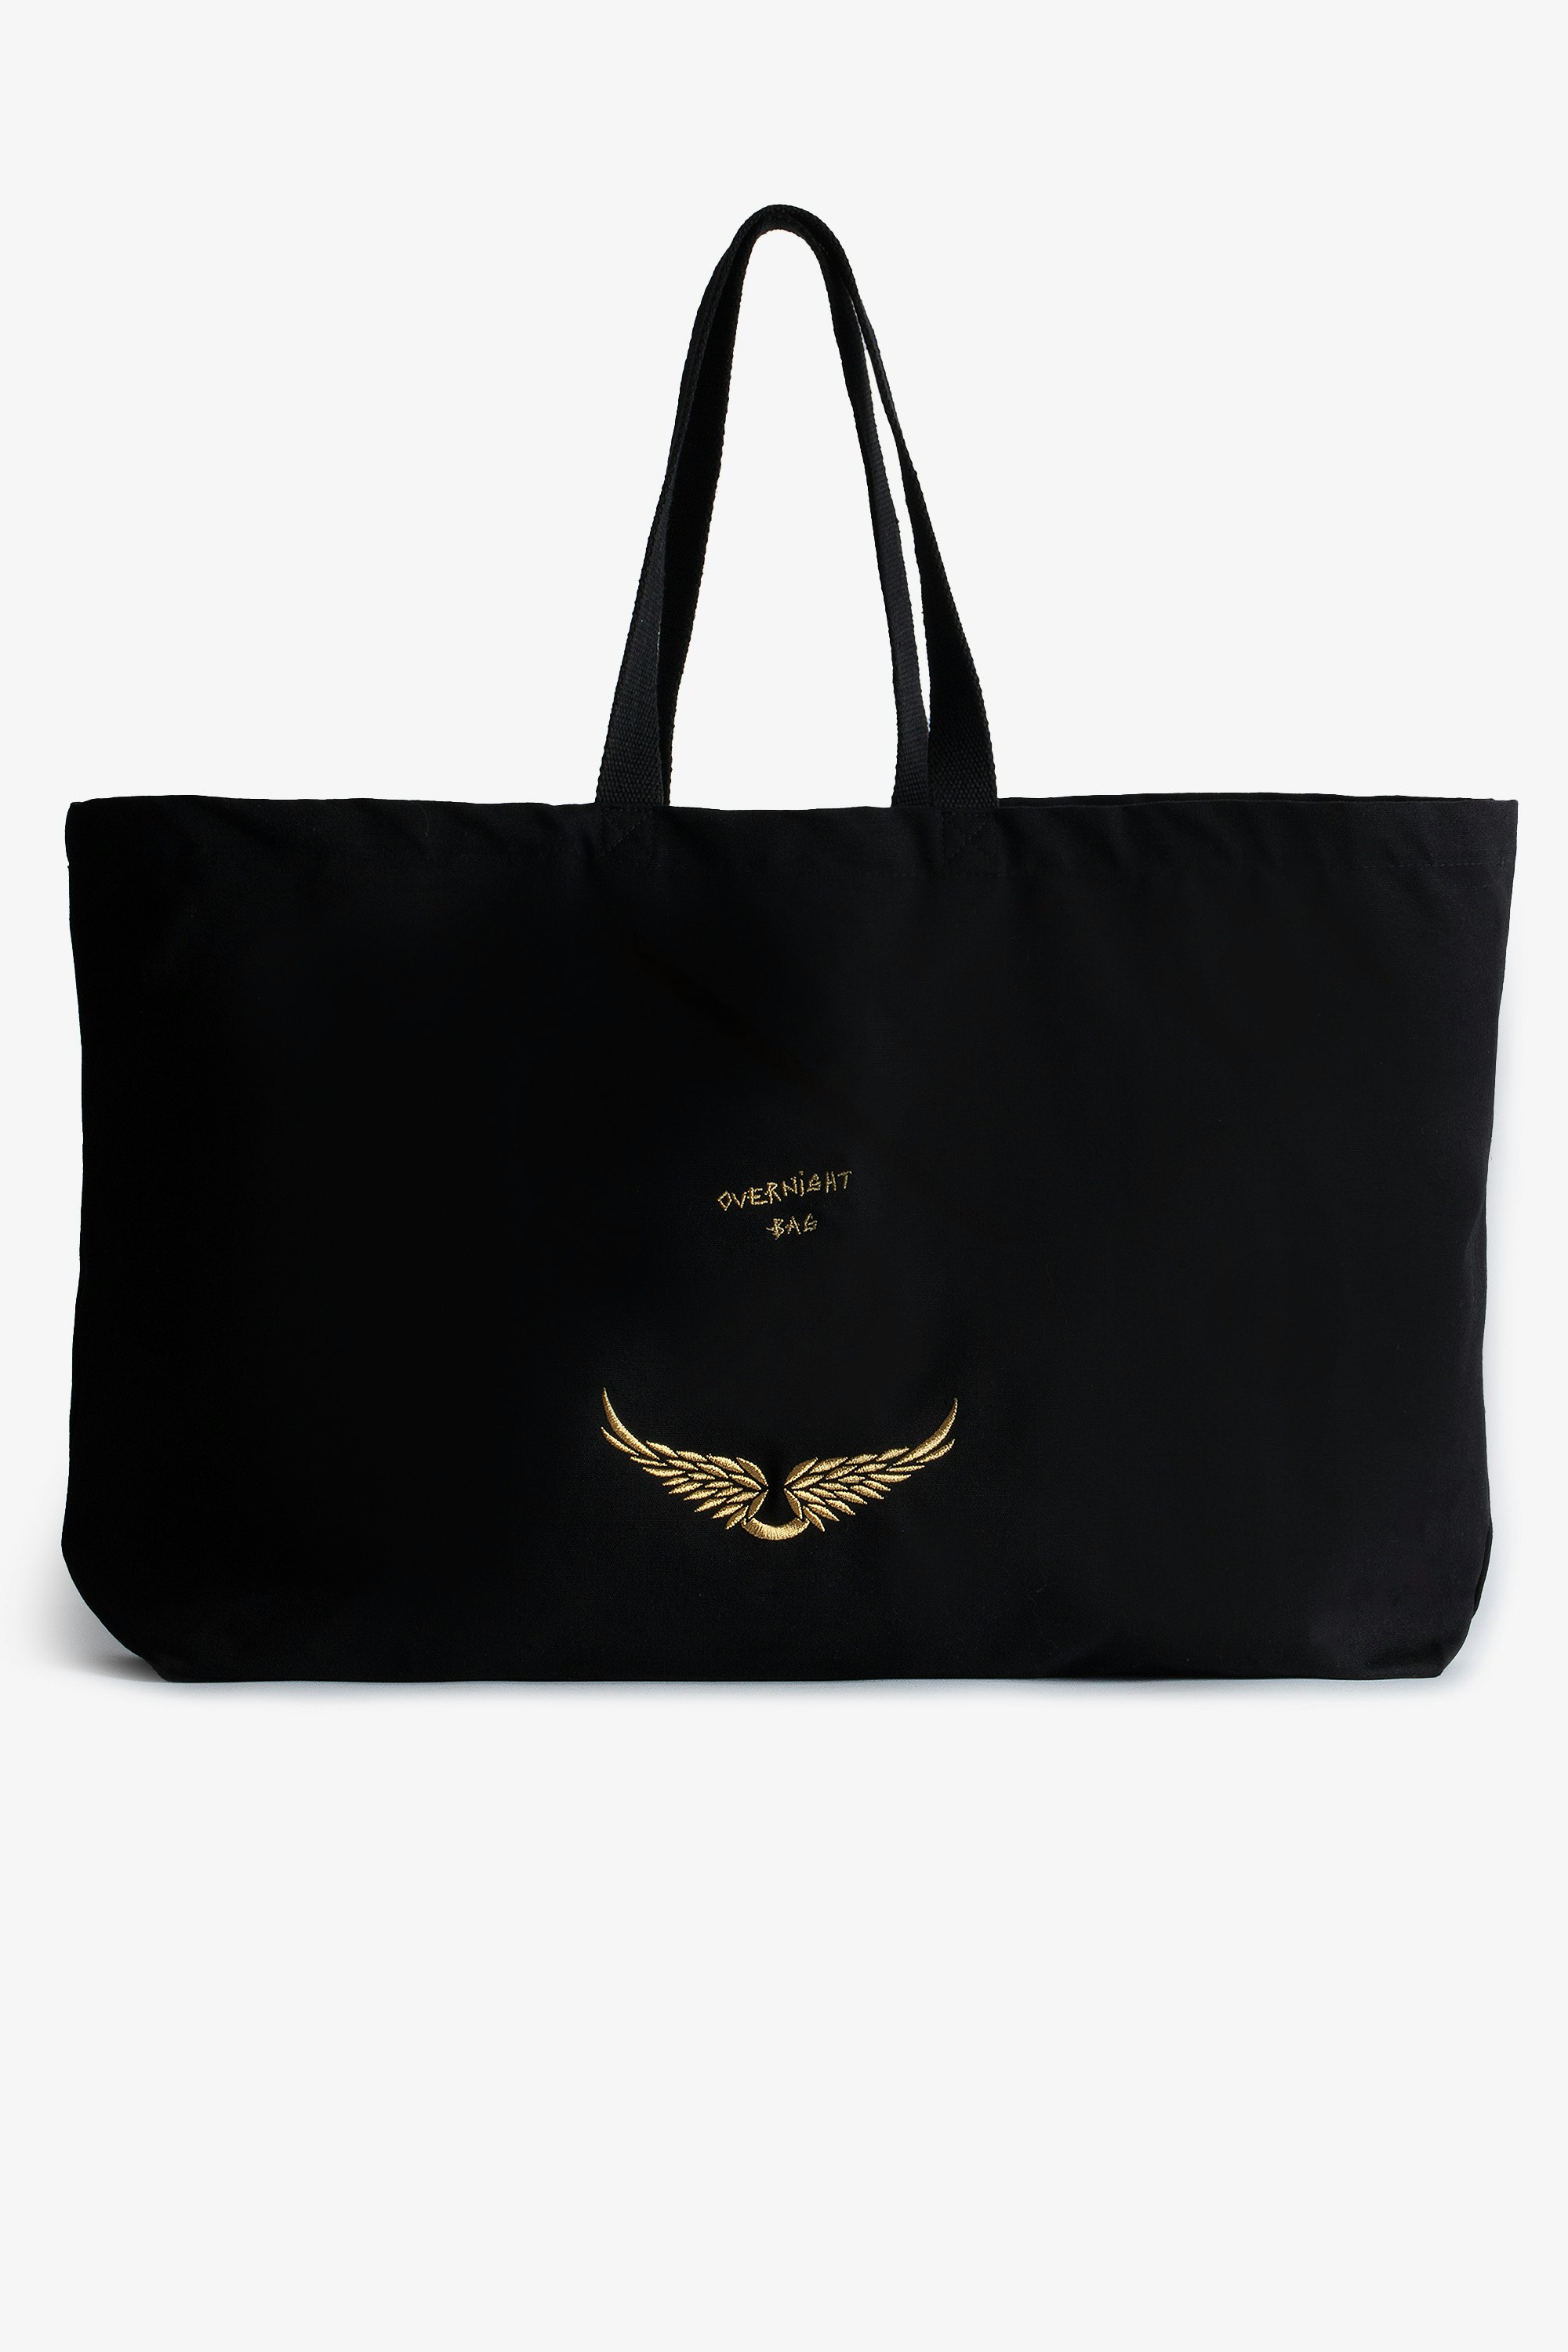 Overnight Tote Bag - Voltaire Vice large black cotton tote bag.